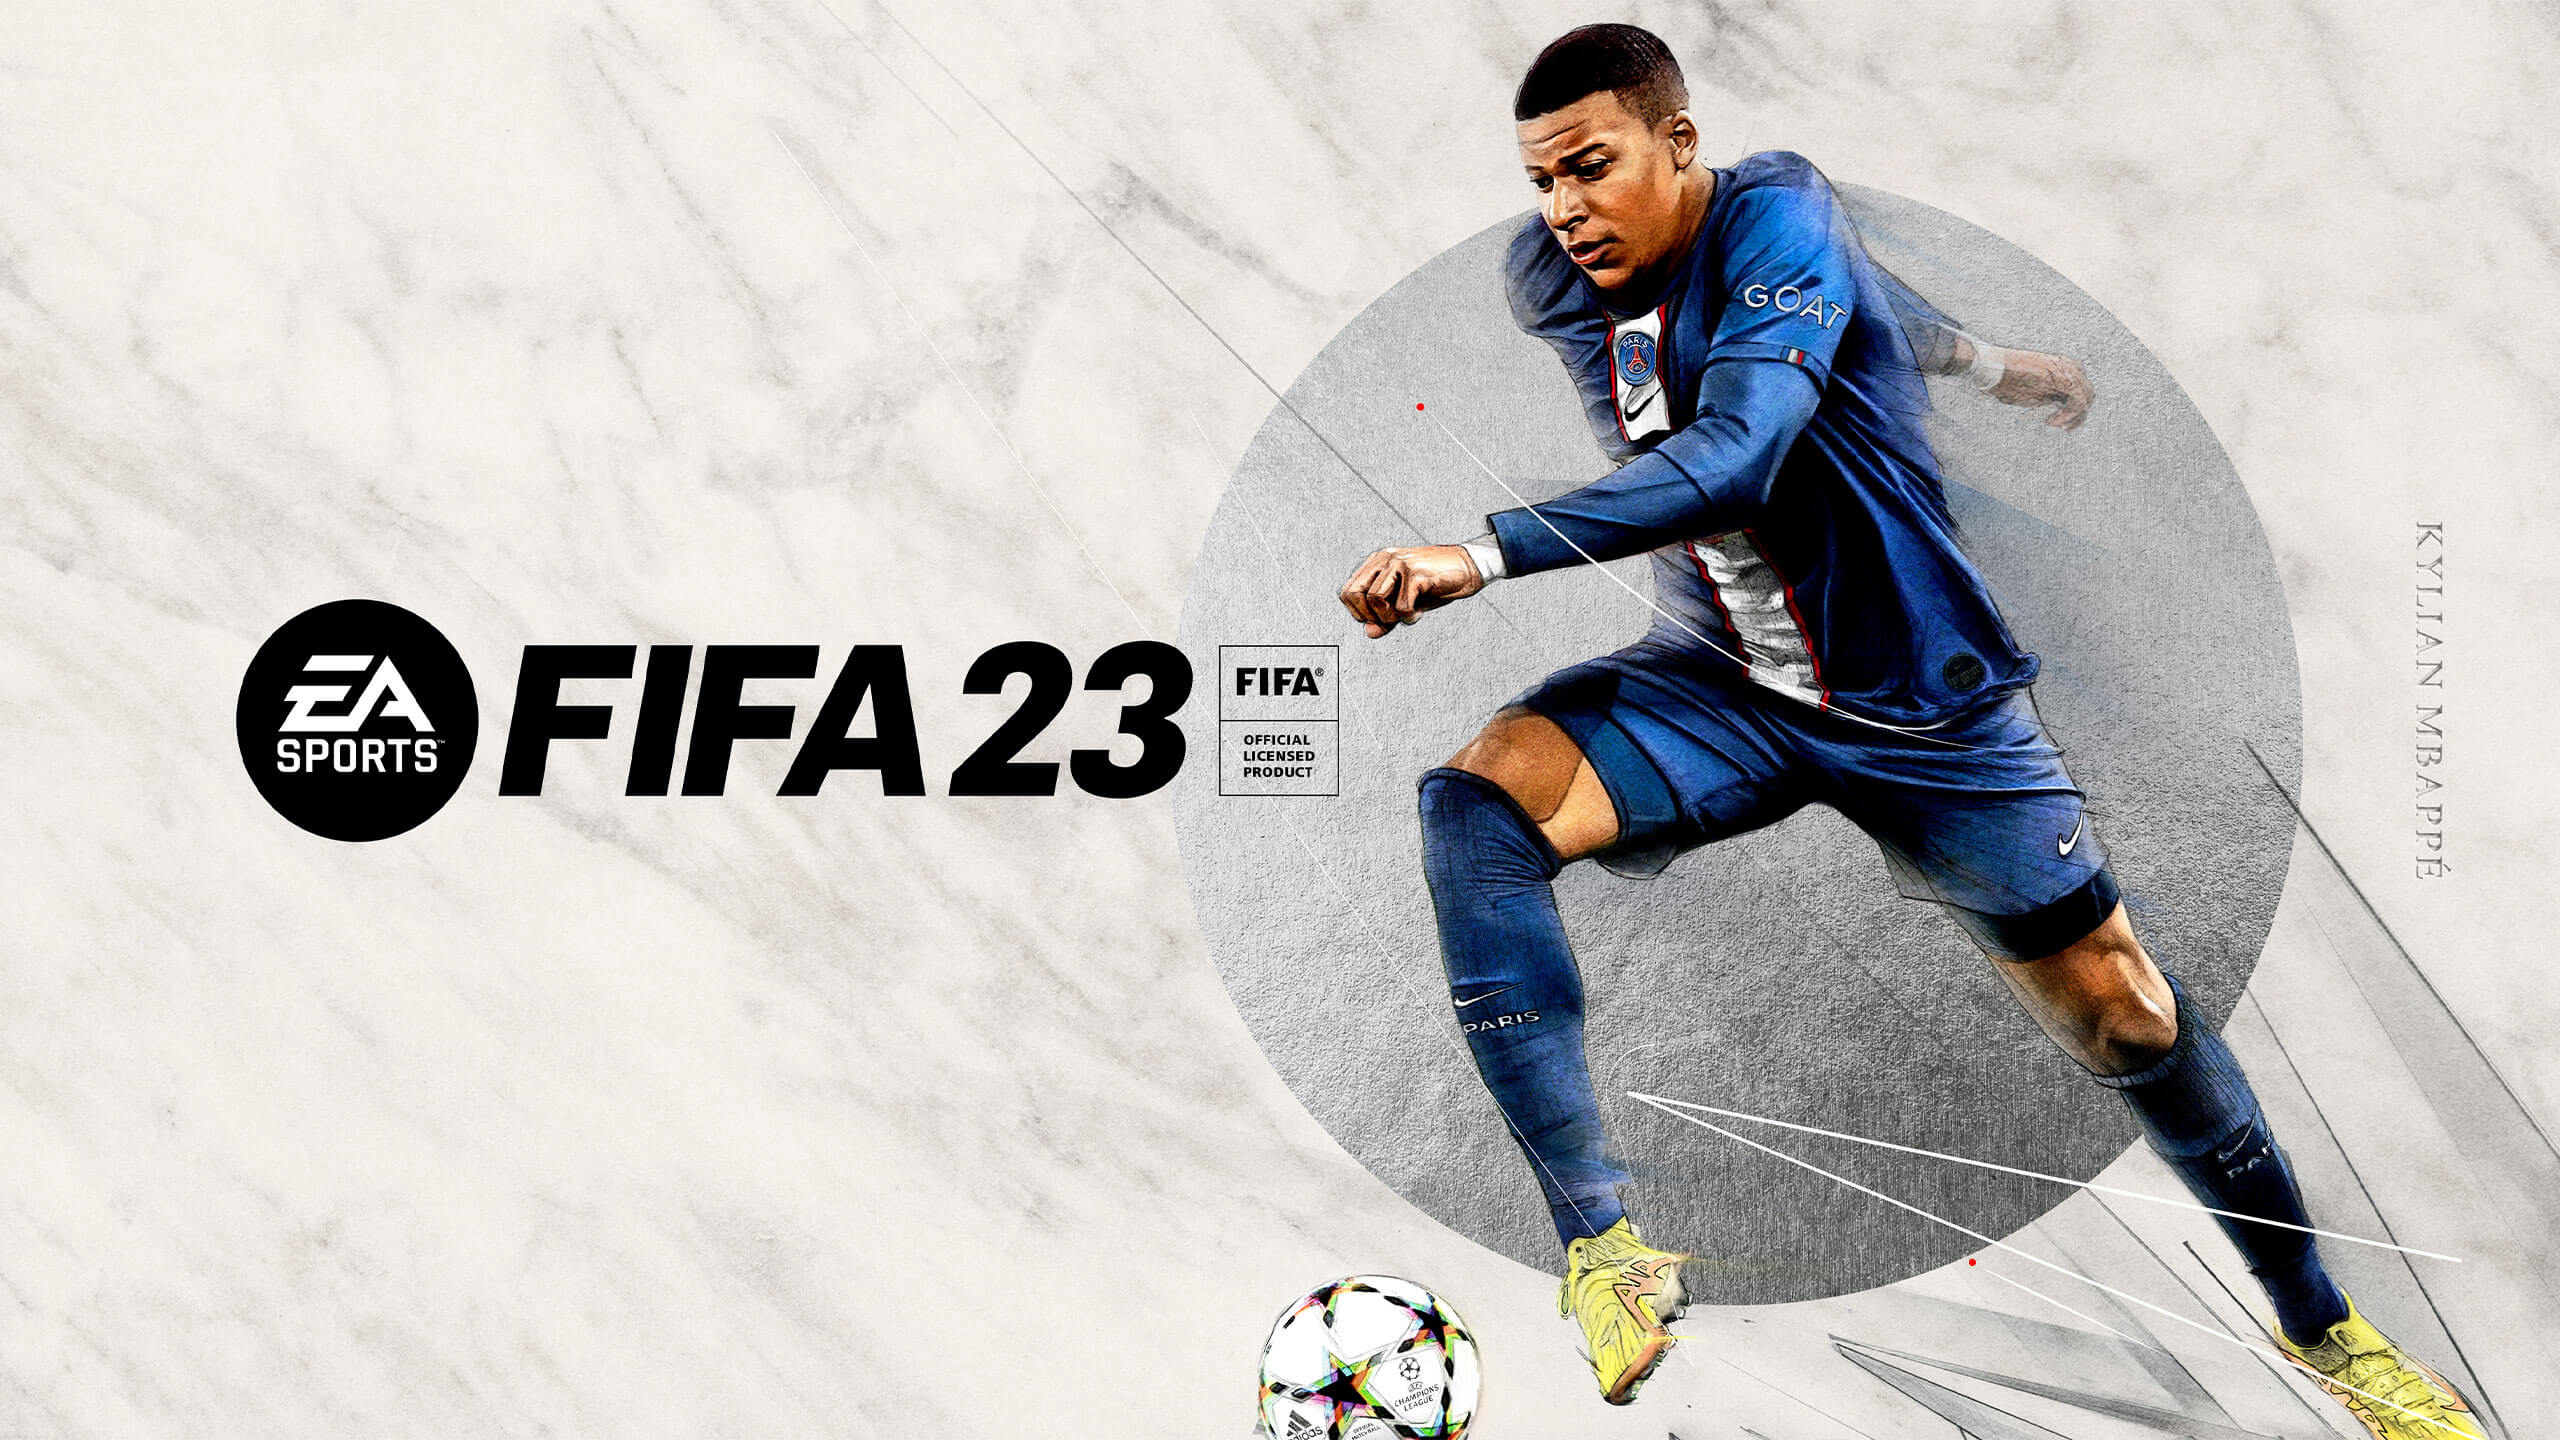 FIFA 22 in test: Notebook and desktop benchmarks -  Reviews